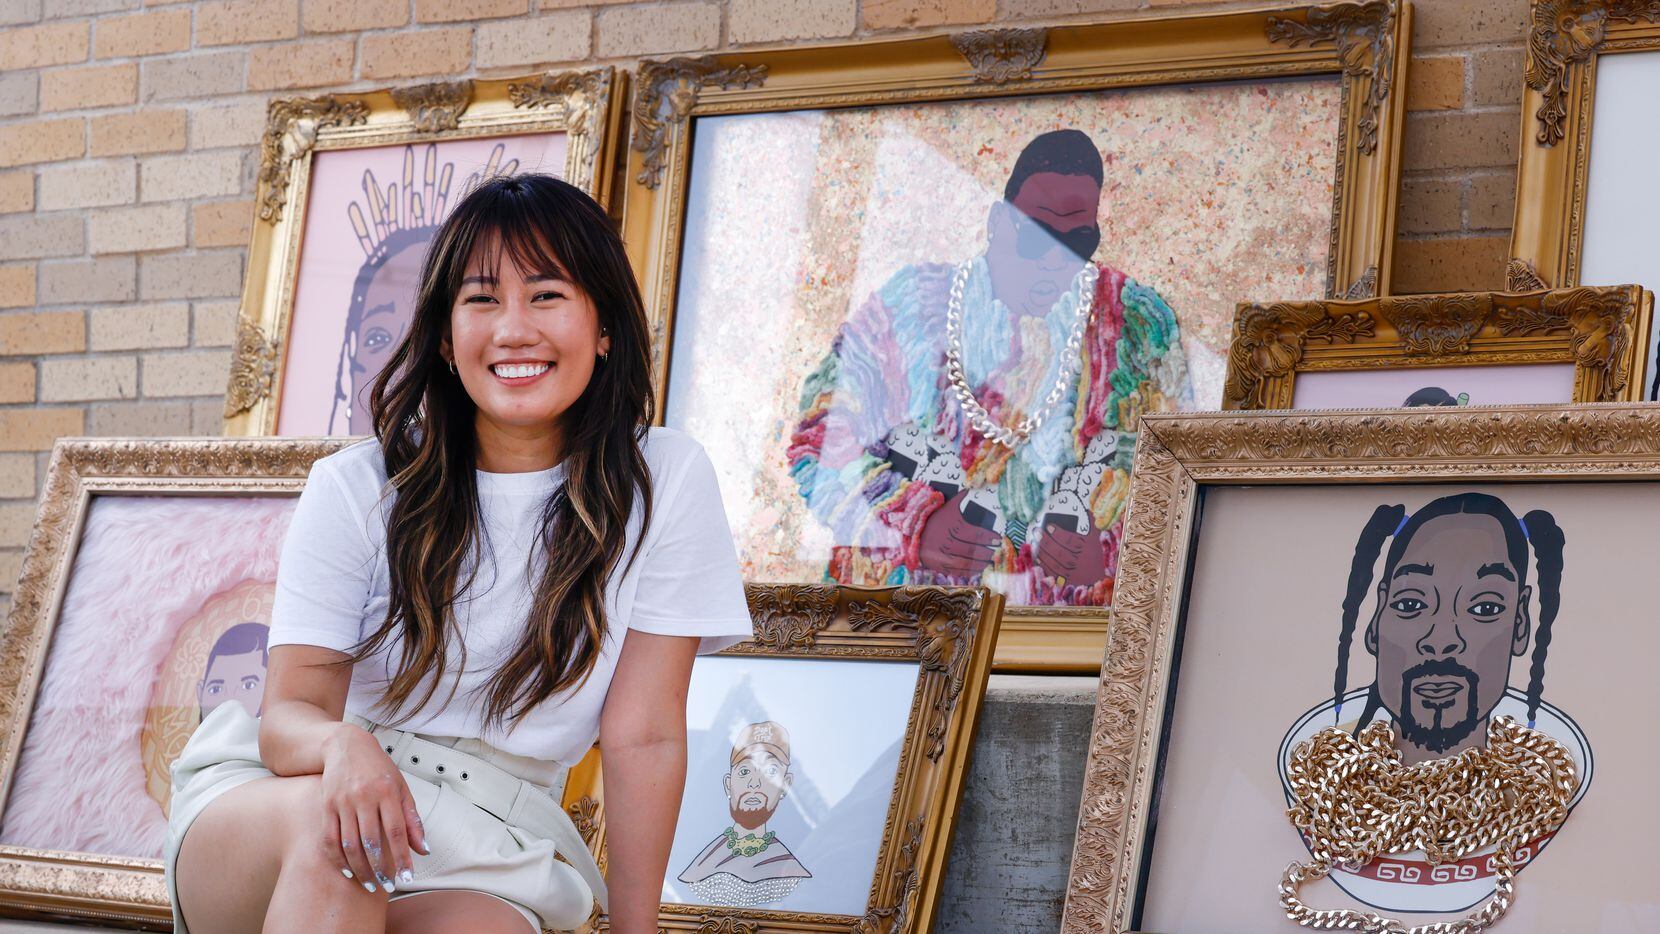 Christina “Tiny” Nguyen poses with her artwork at the Asian American and Pacific Islander...